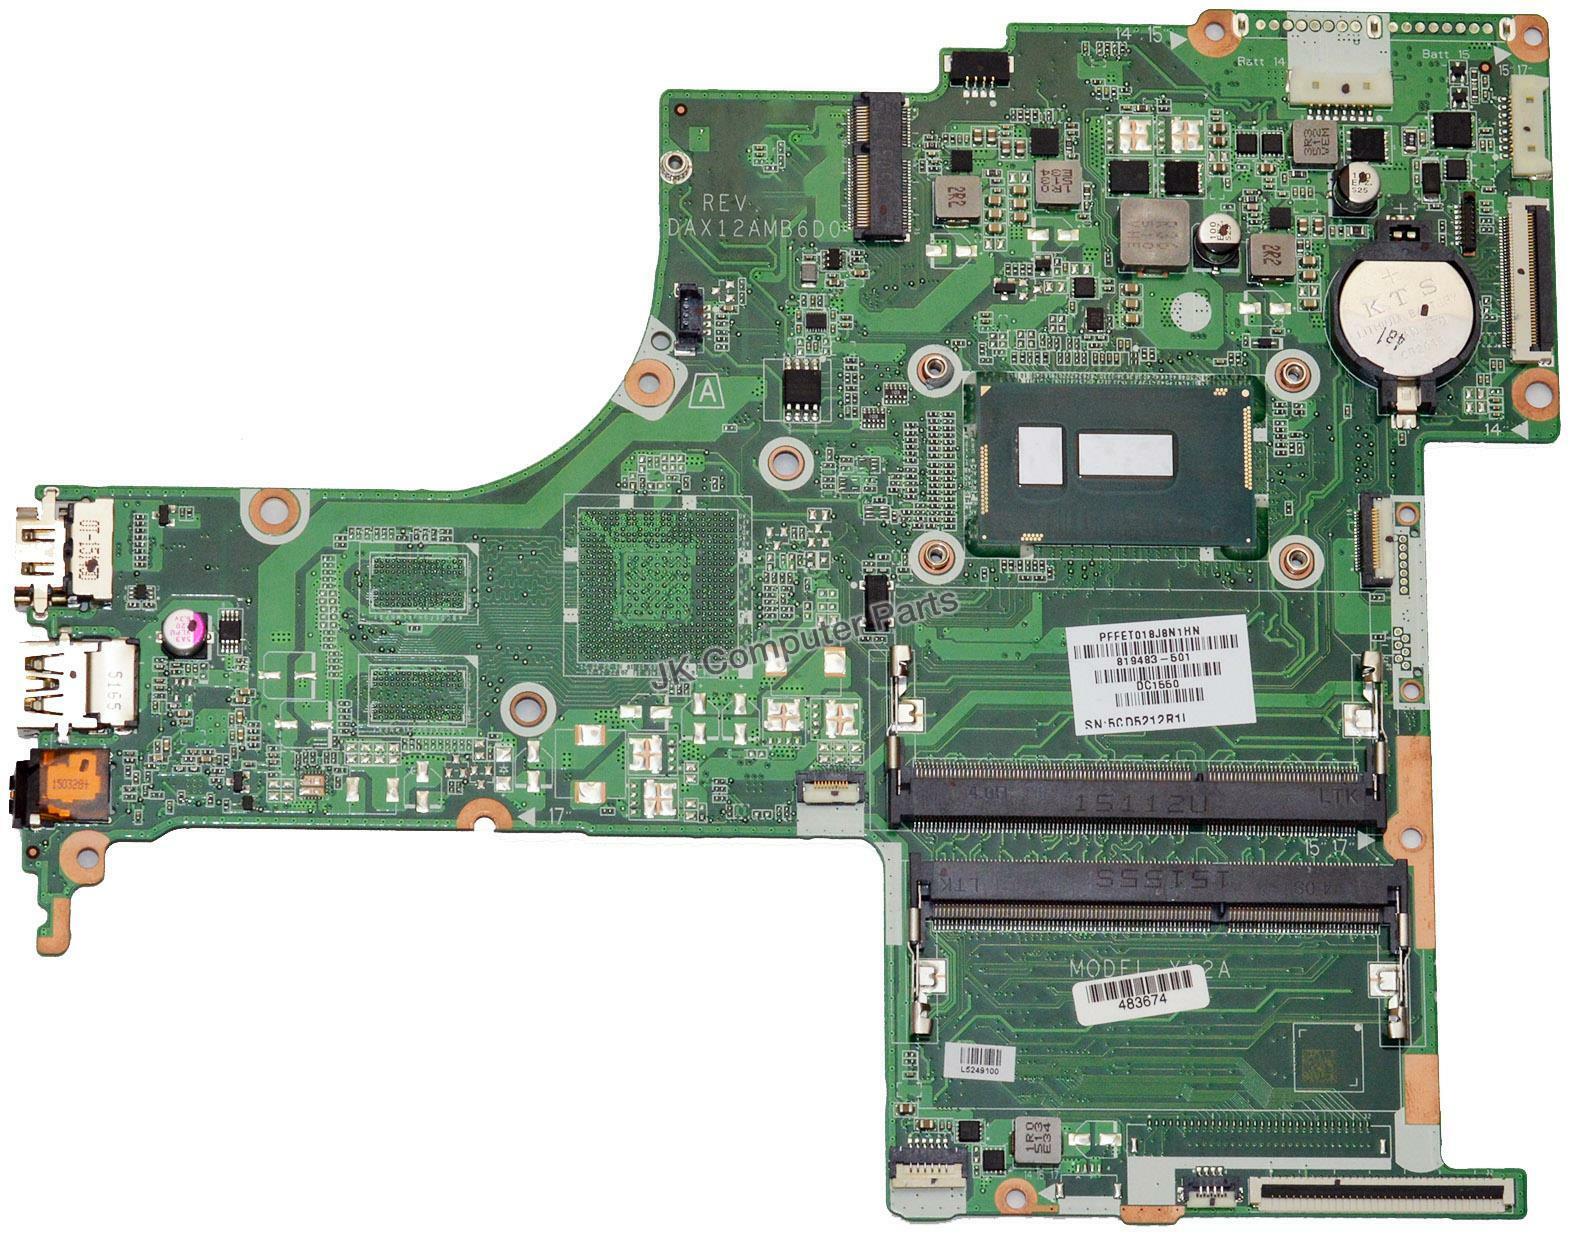 HP Pavilion 17-G015DX Laptop Motherboard Intel i7-5500U 2.4GHz CPU DAX12AMB6D0 No accessories are included